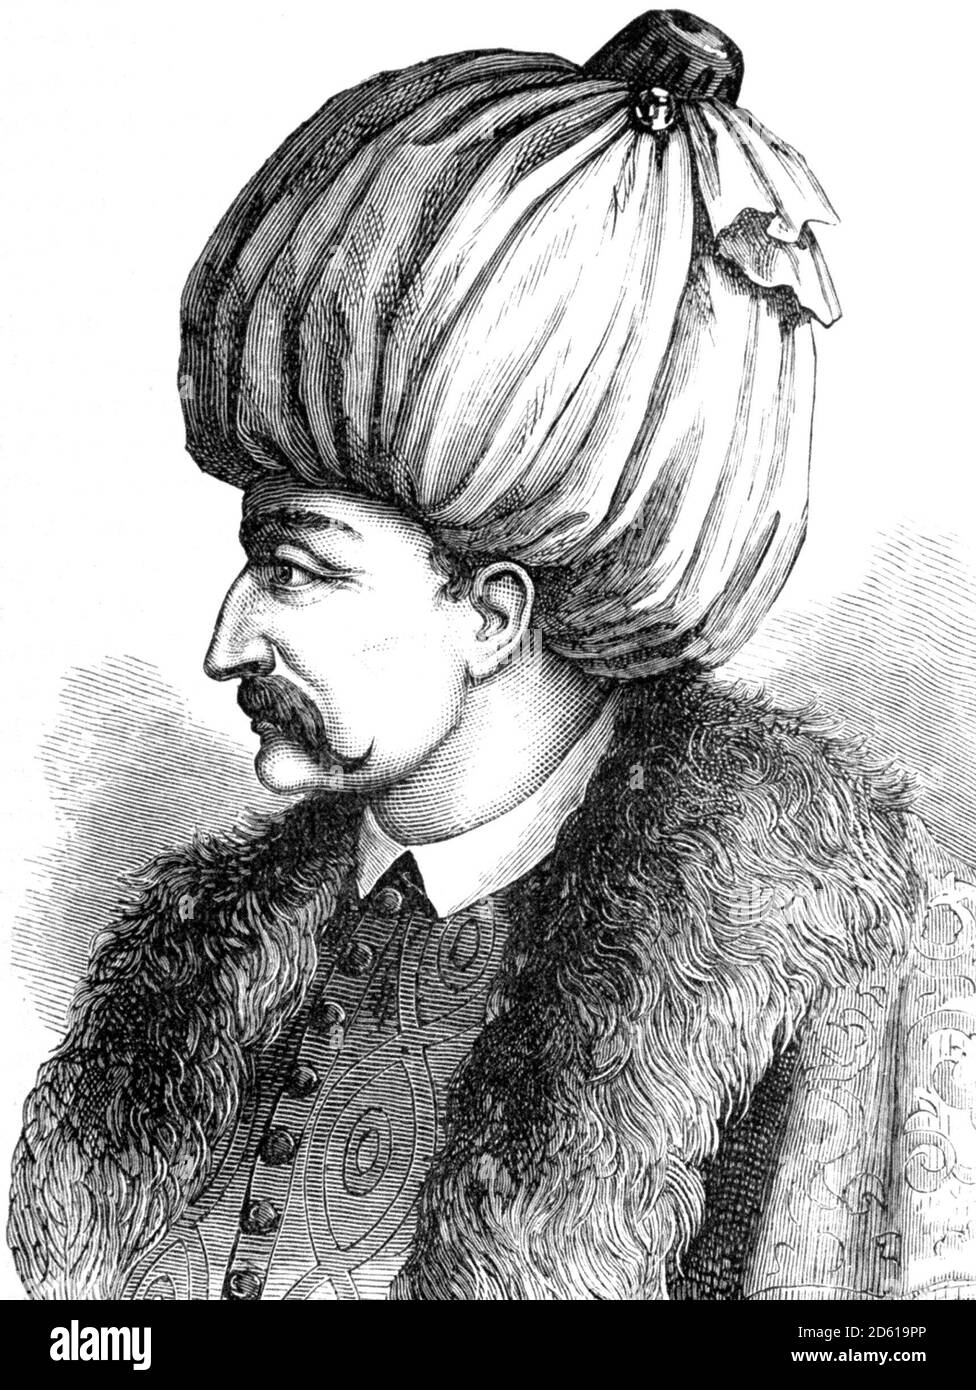 Suleiman the Magnificent. Portrait of the tenth and longest-reigning Sultan of the Ottoman Empire, Suleiman I (1494-1566), 19th century engraving Stock Photo